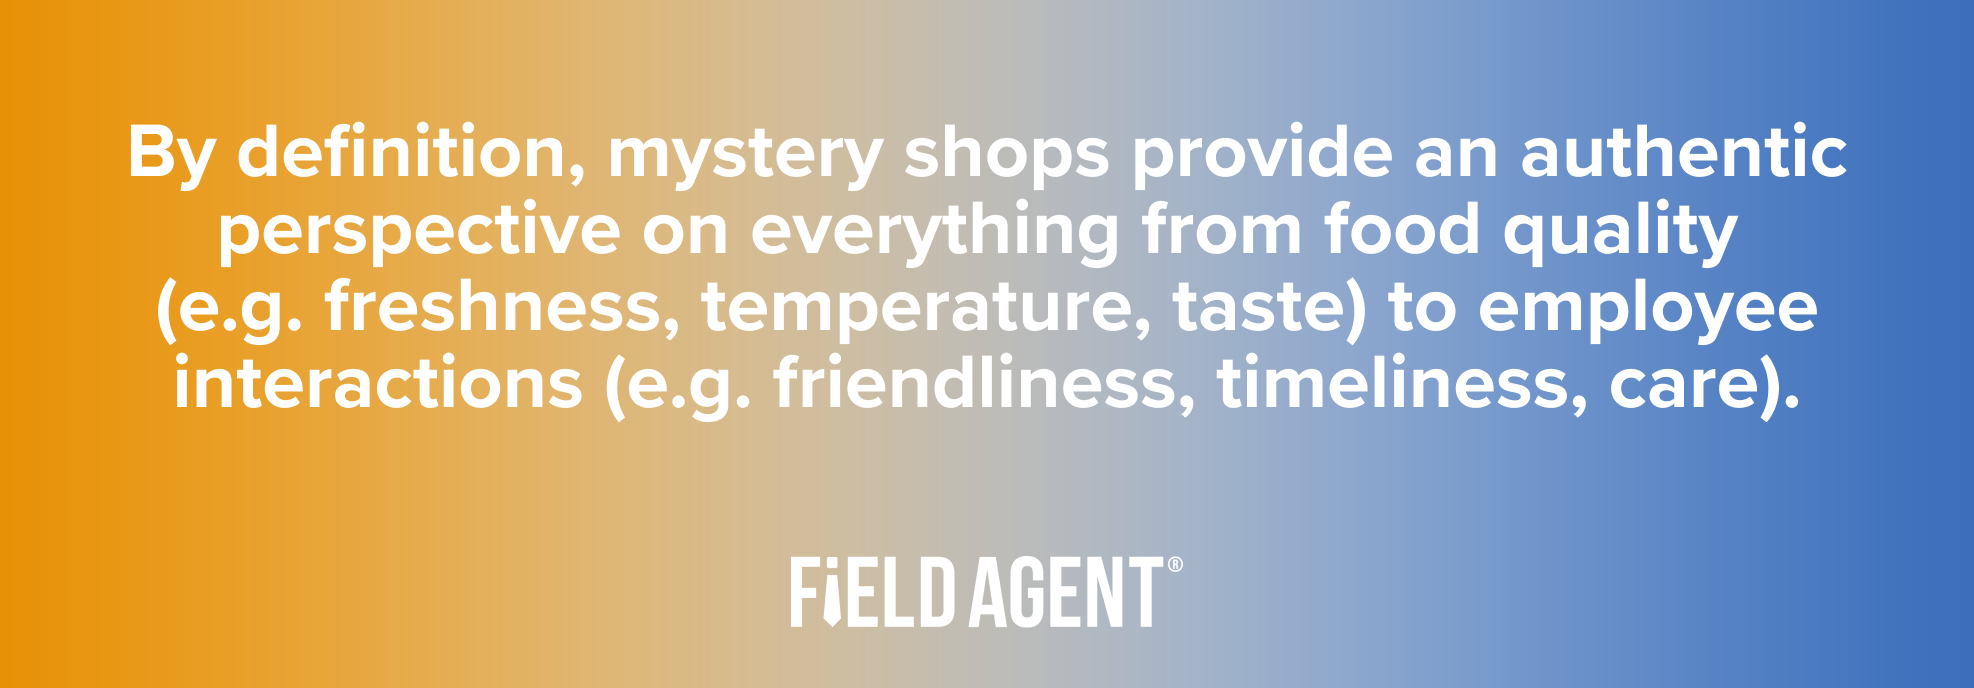 FA Blog Text Graphic 8 Ways Mystery Shopping...